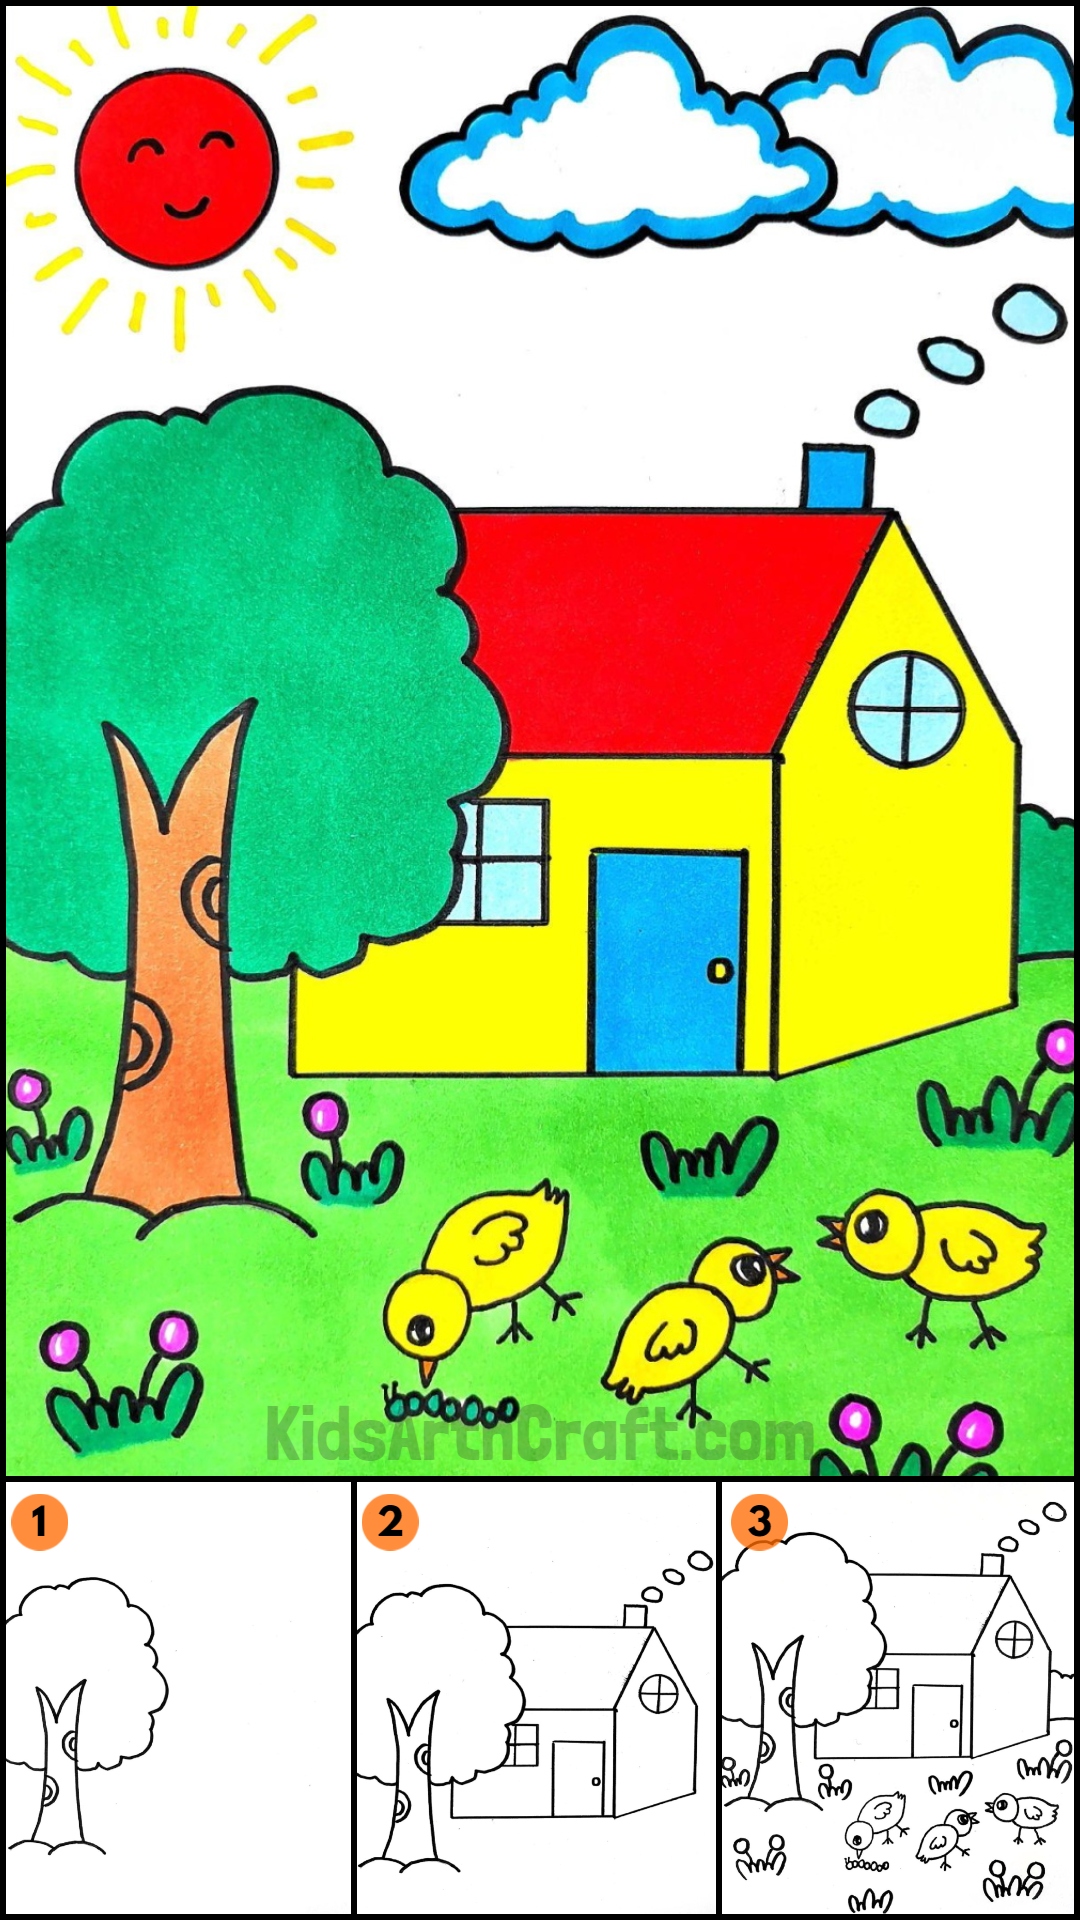 How to draw House step by step easy drawing for kids | Welcome to RGBpencil